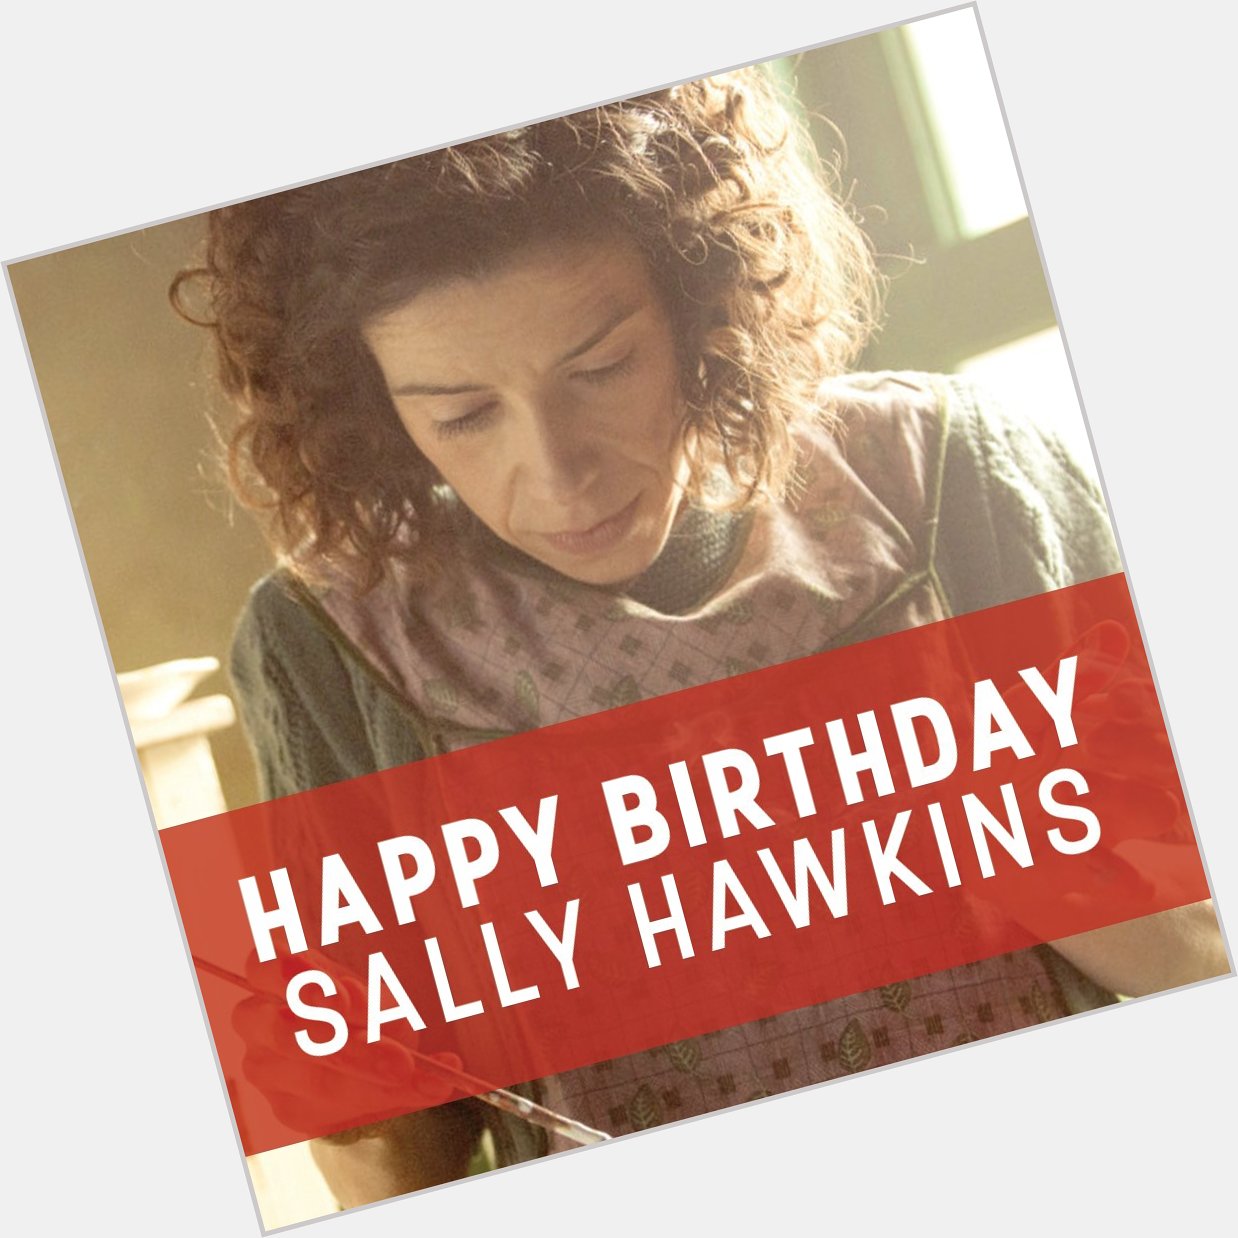 Happy Birthday to the amazing, and talented SALLY HAWKINS!  